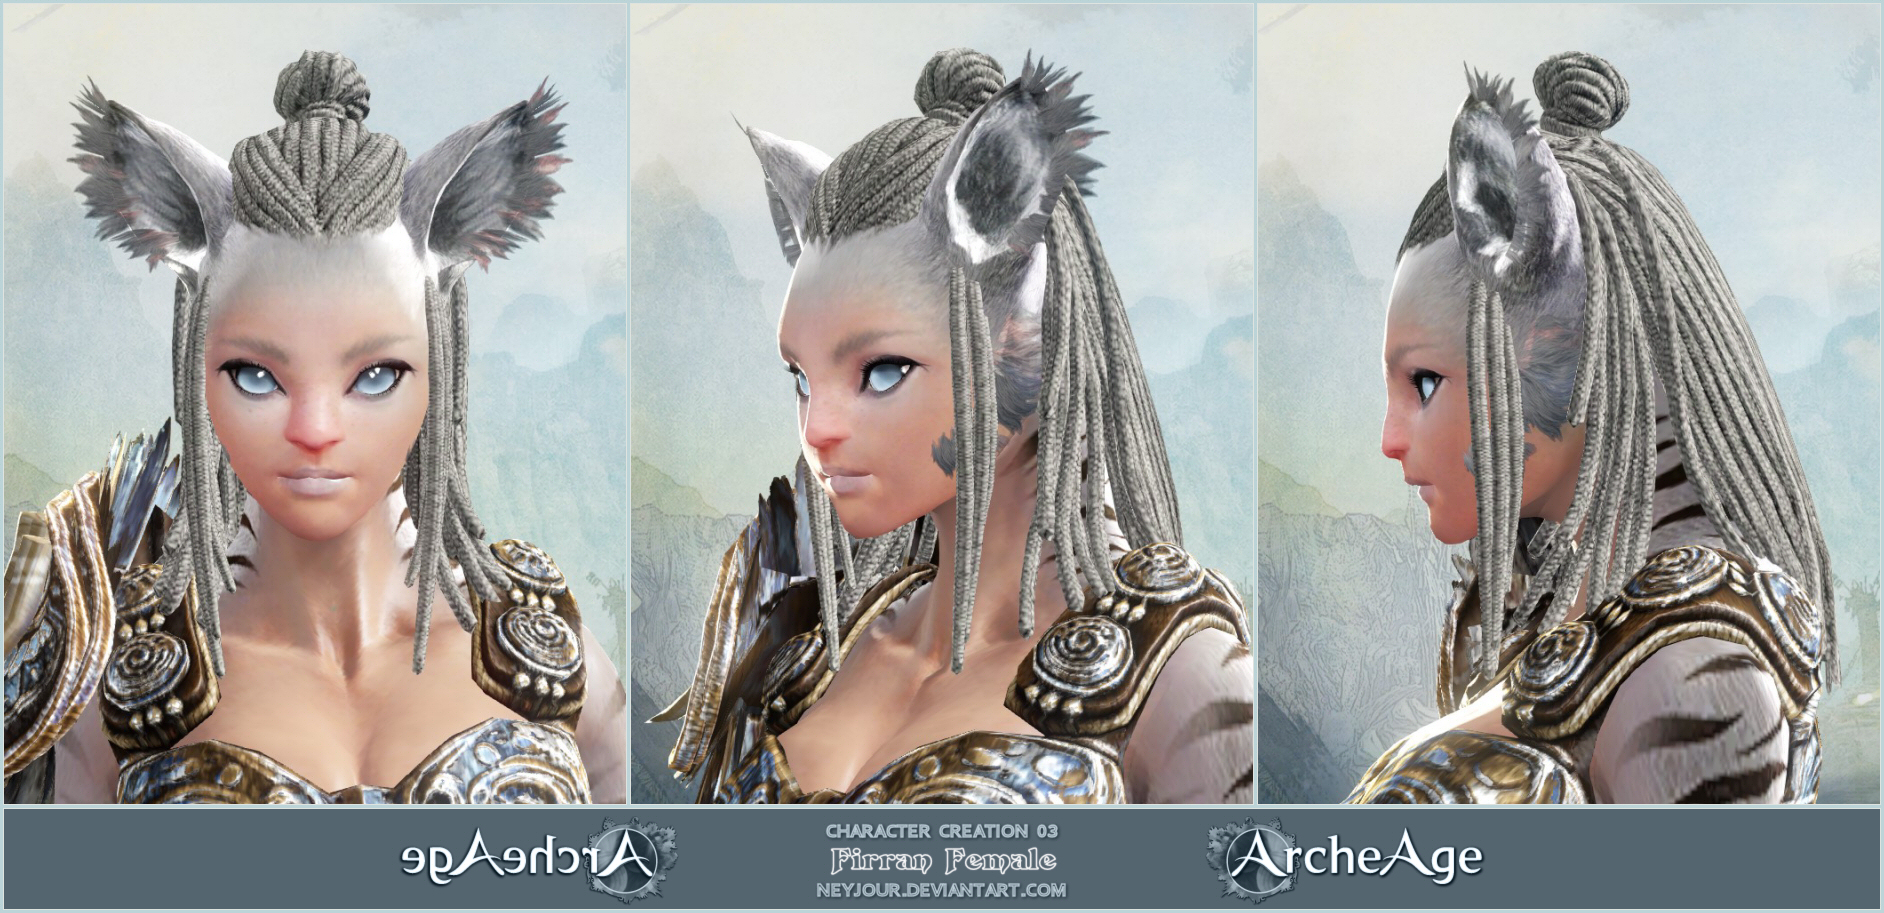 ArcheAge Character Creation 03 By Neyjour On DeviantArt.